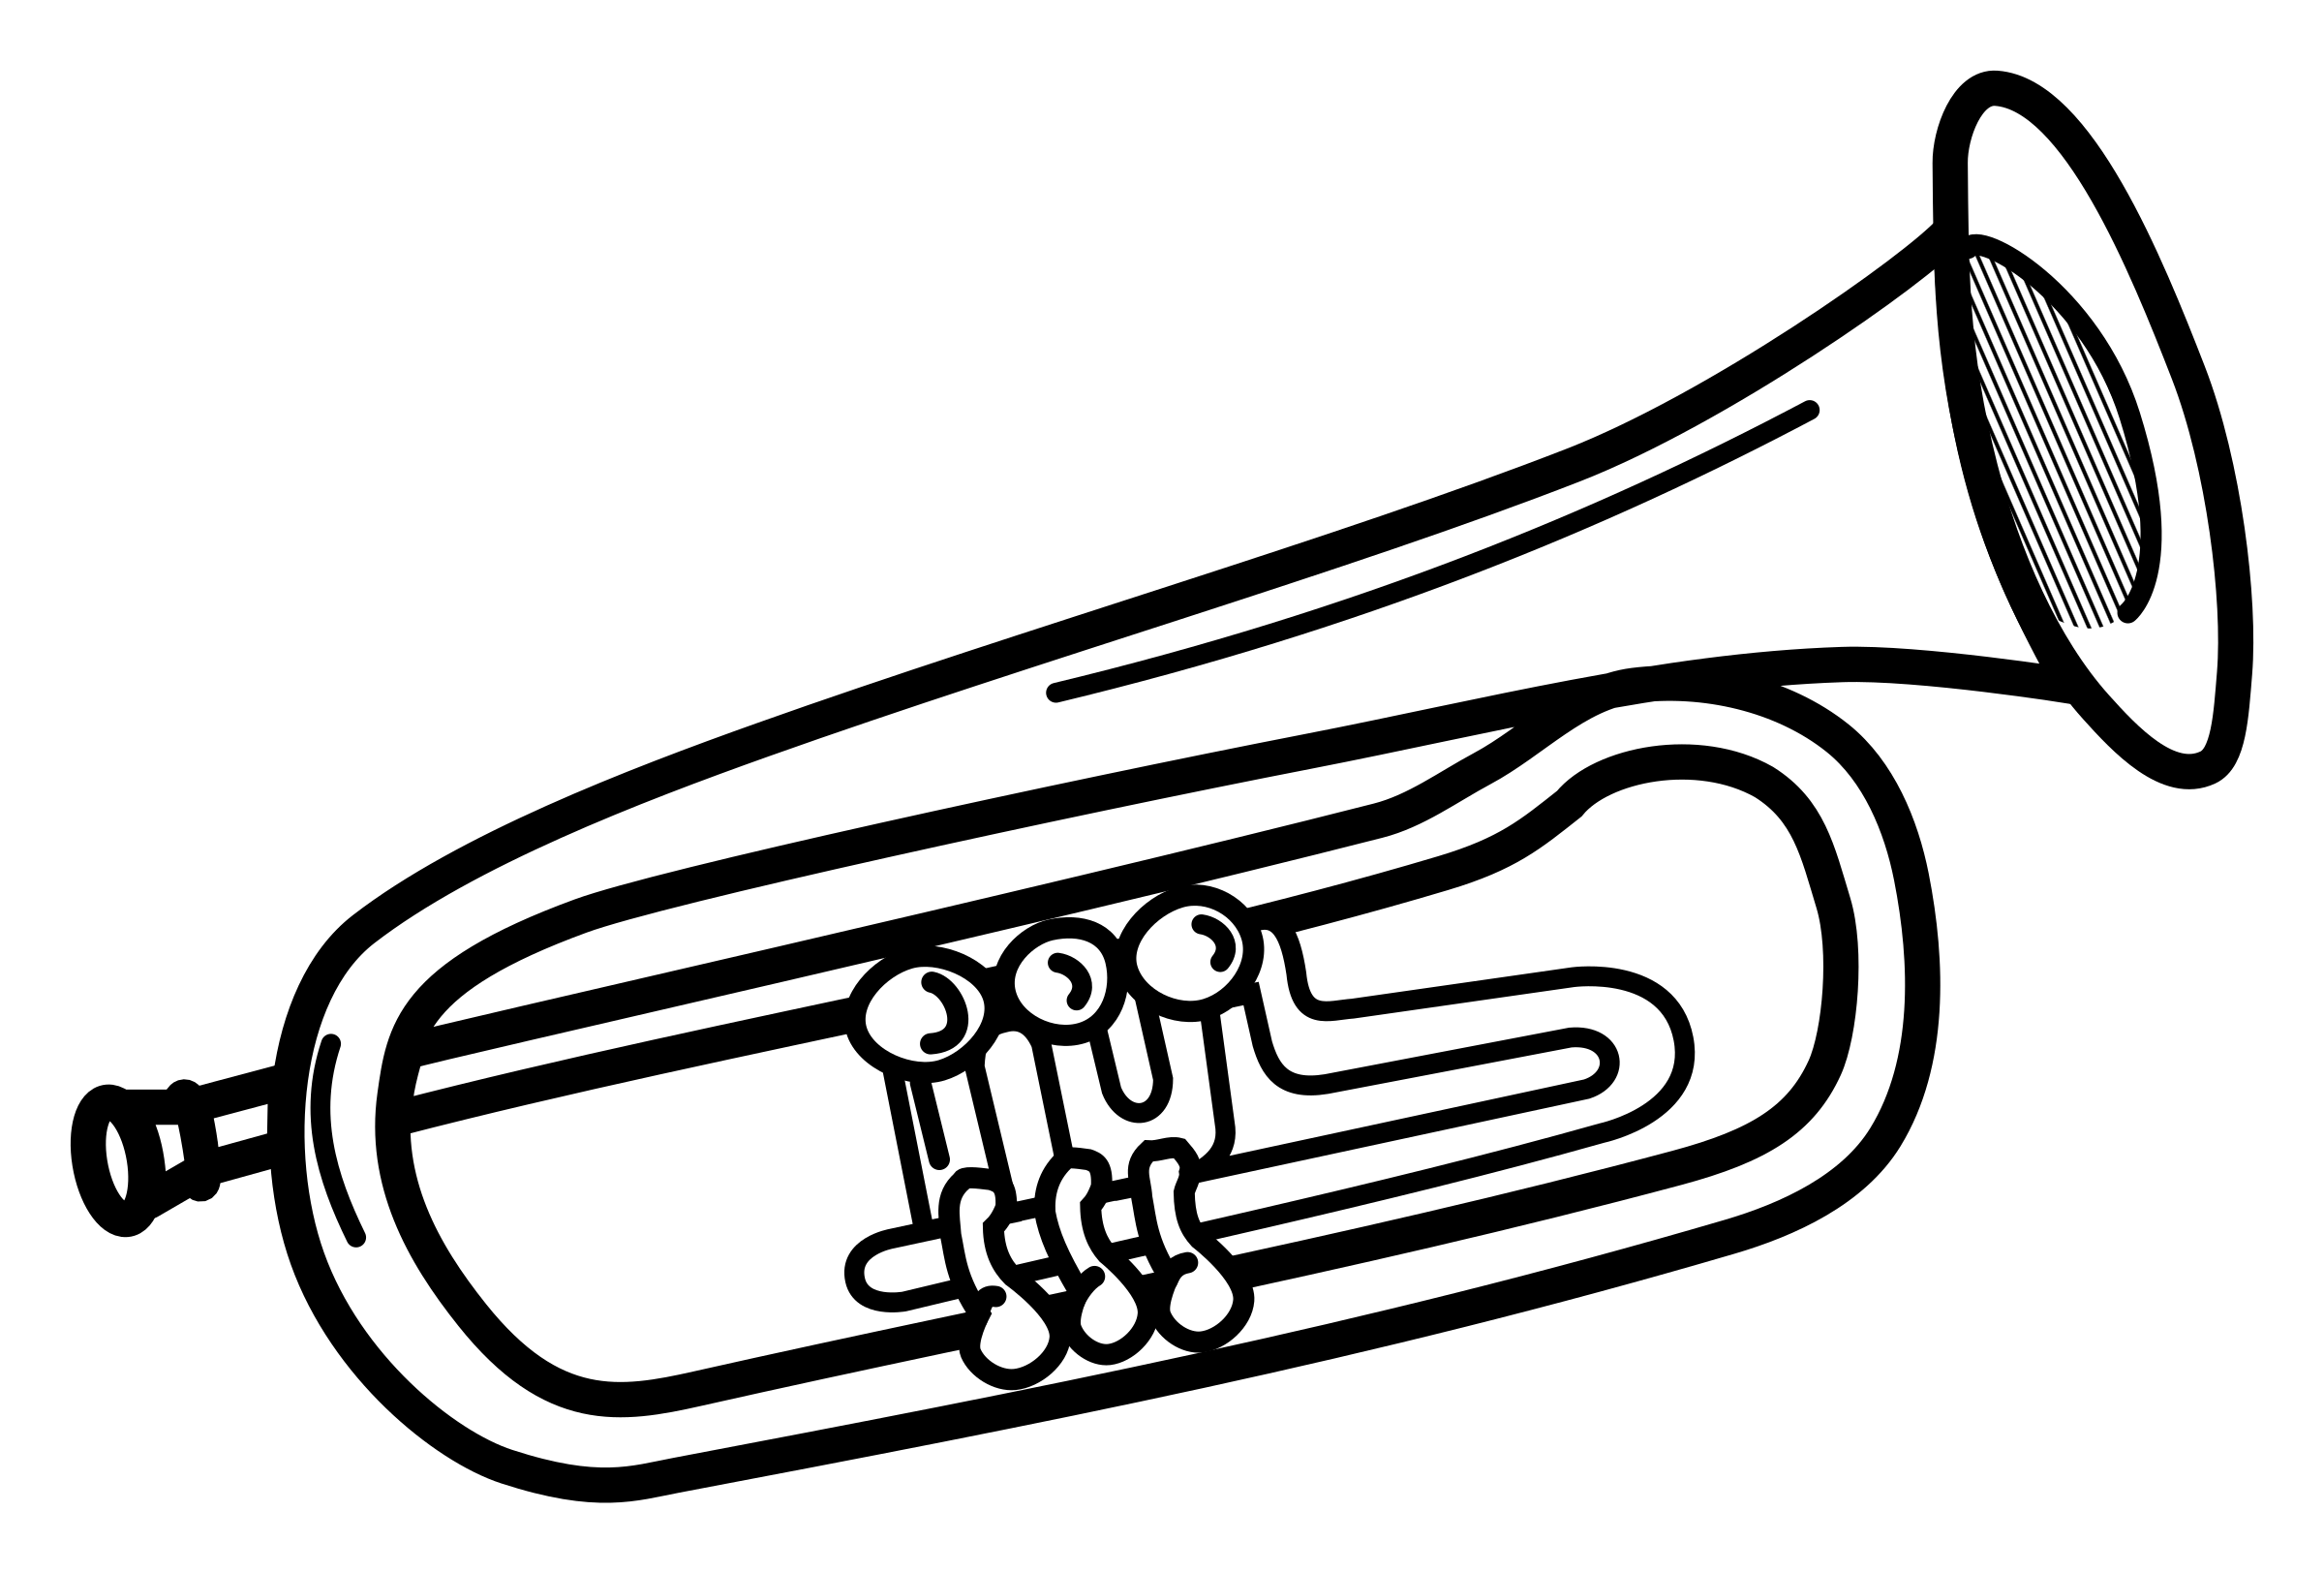 Musical instruments clipart black and white clipart images